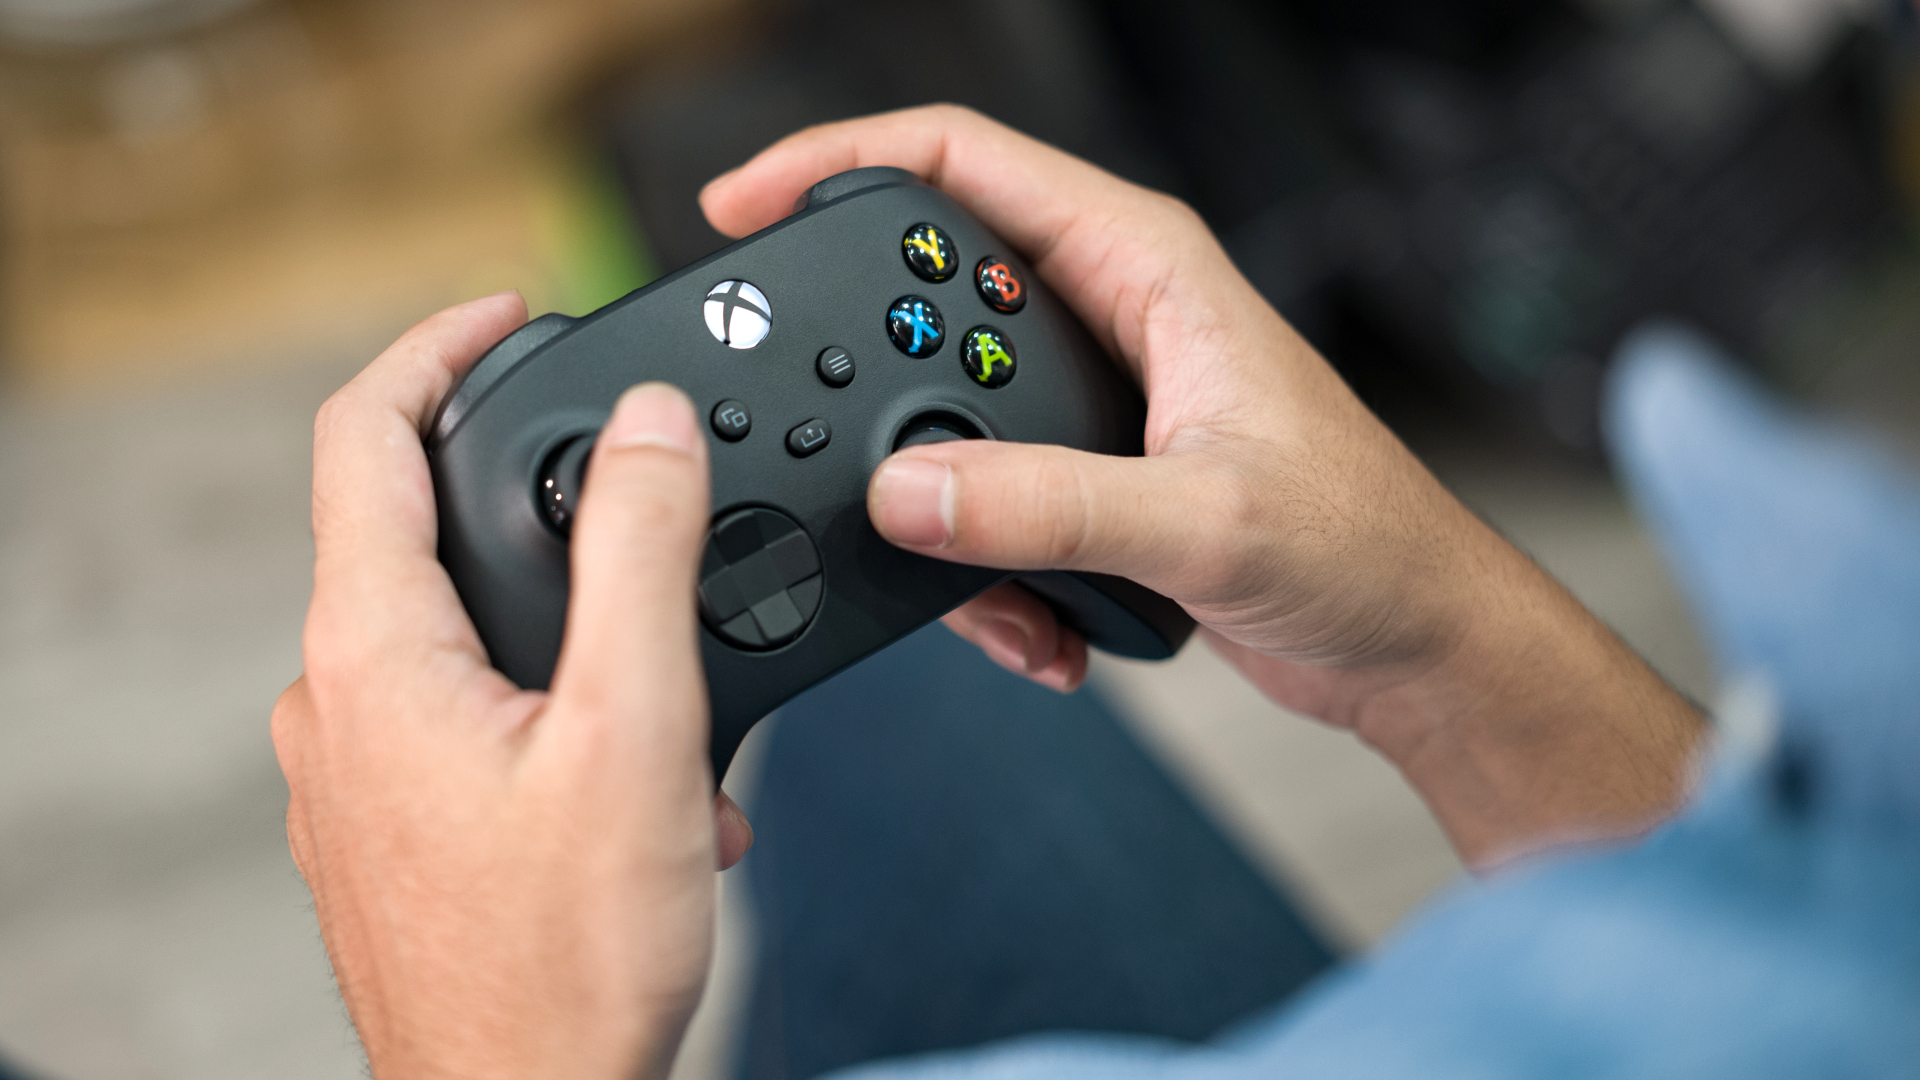 An Xbox Series X controller held in two hands